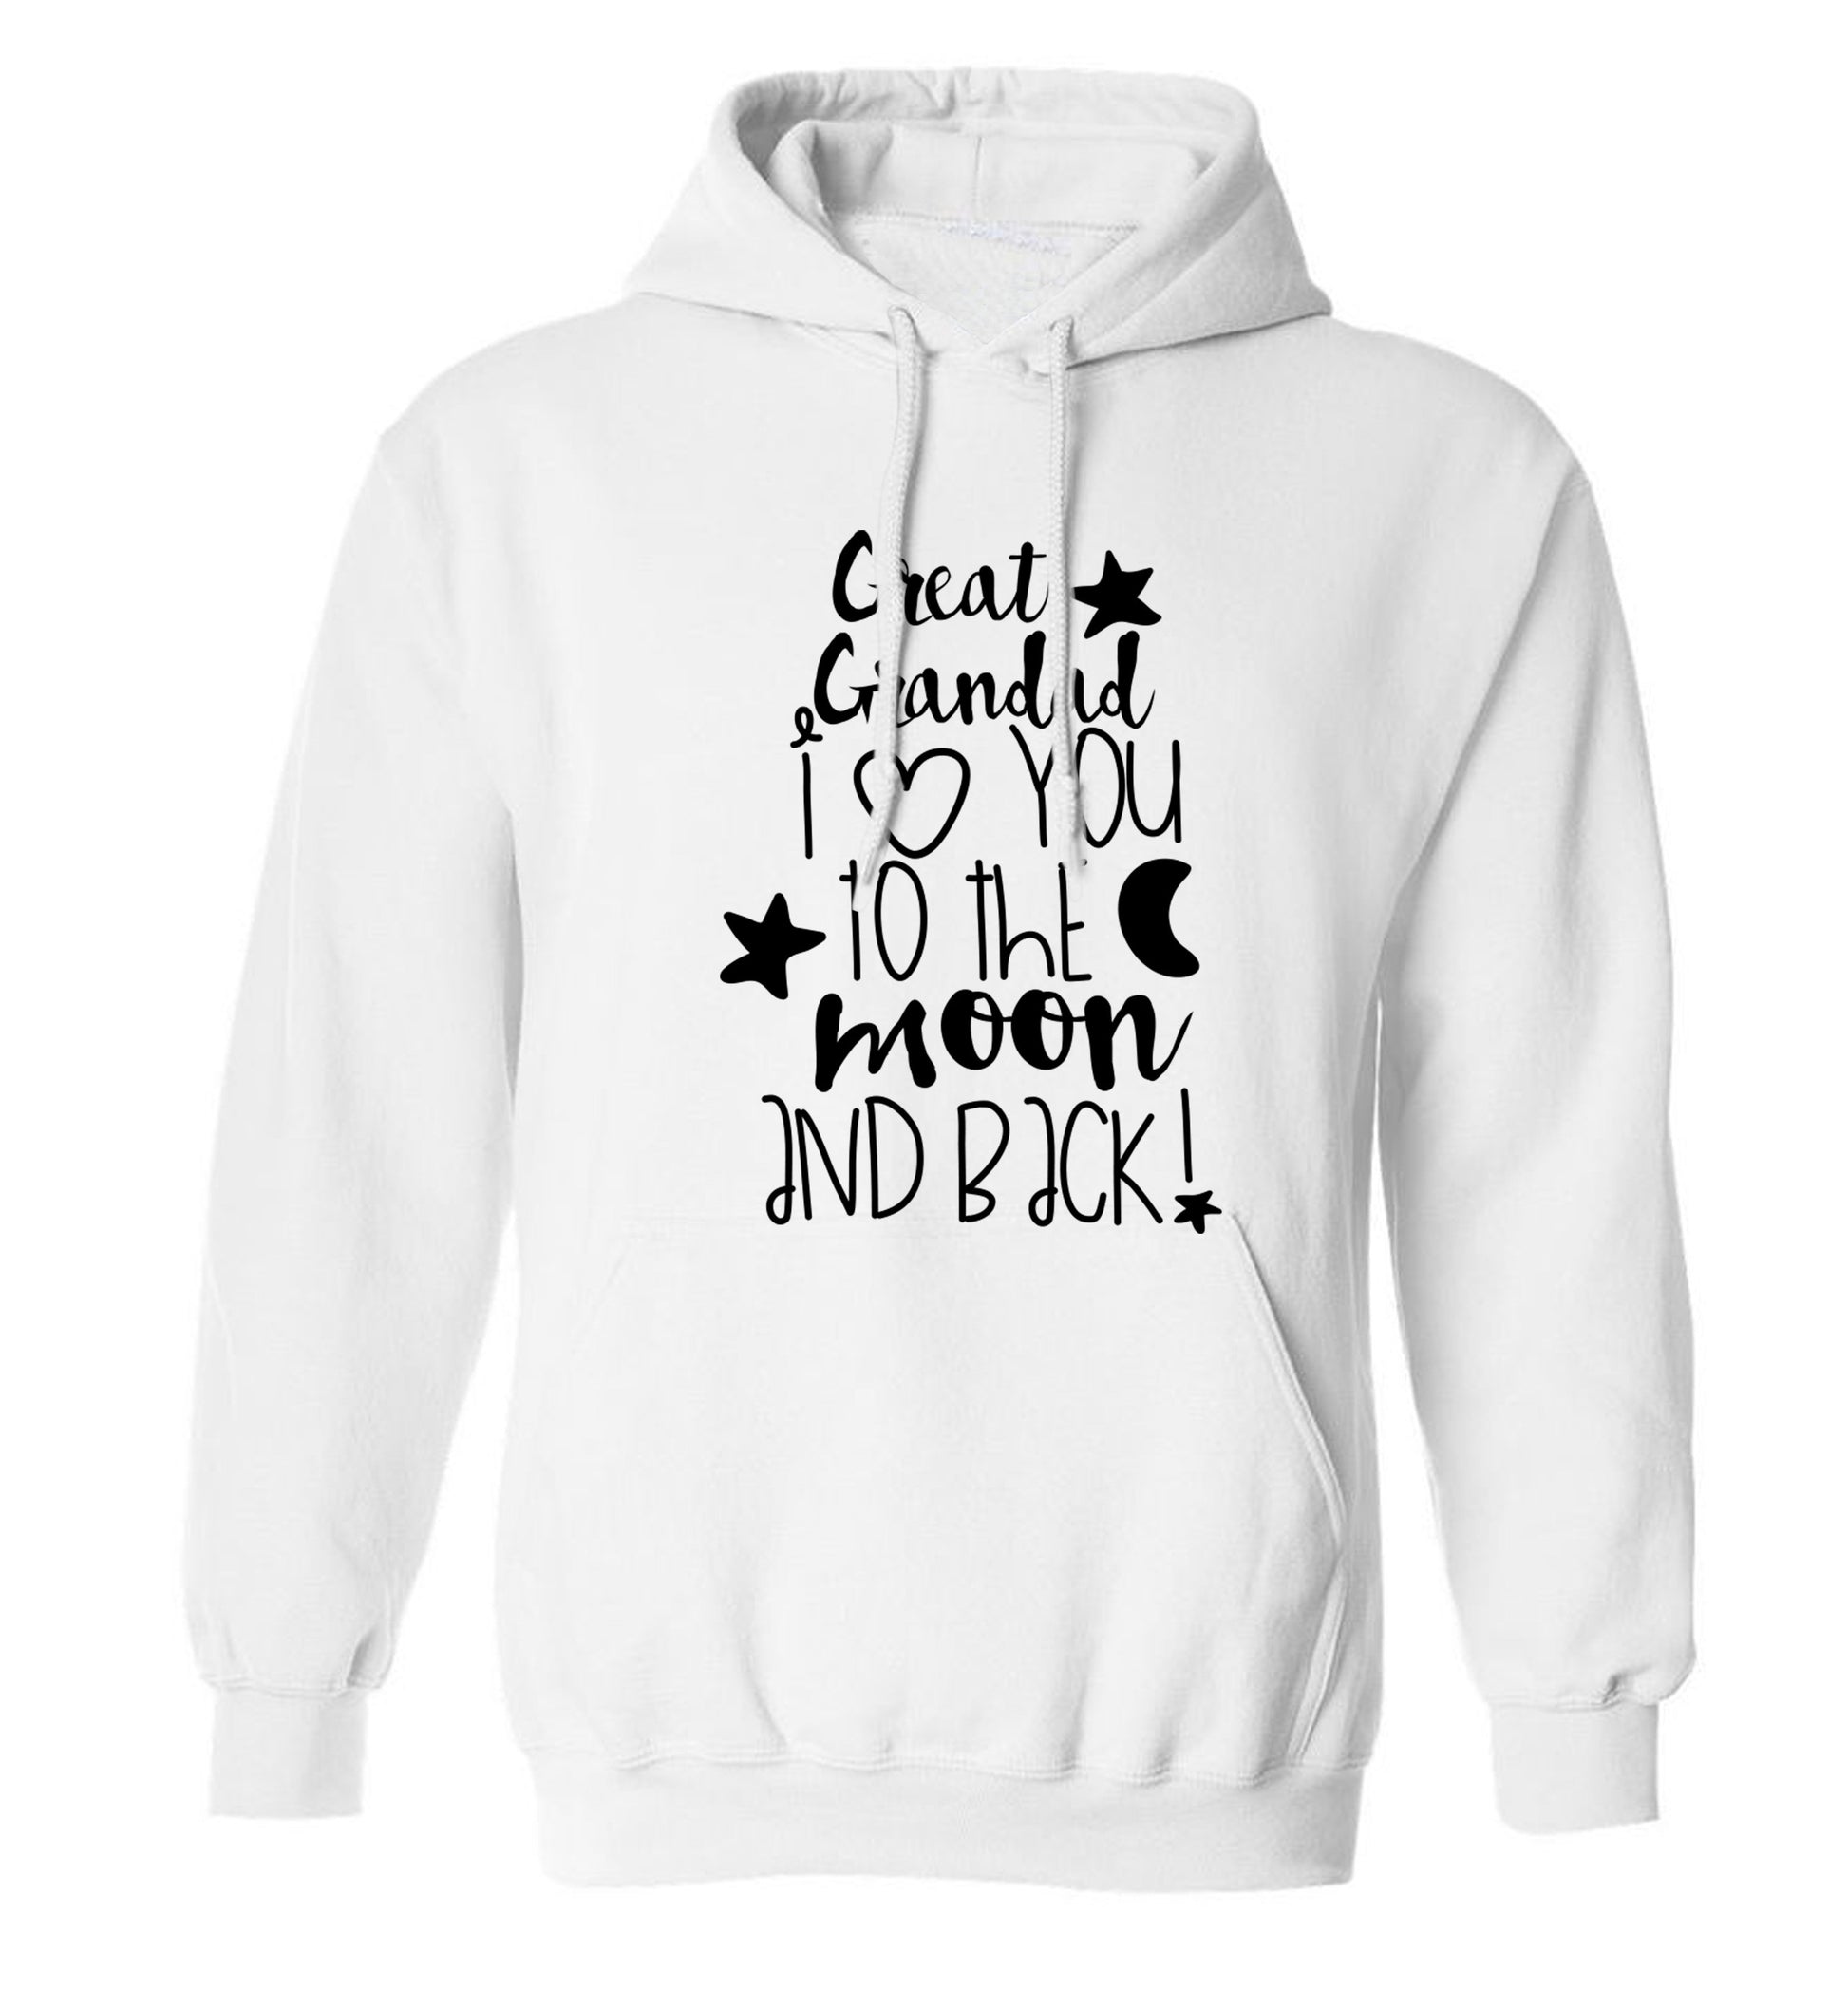 Great Grandad I love you to the moon and back adults unisex white hoodie 2XL